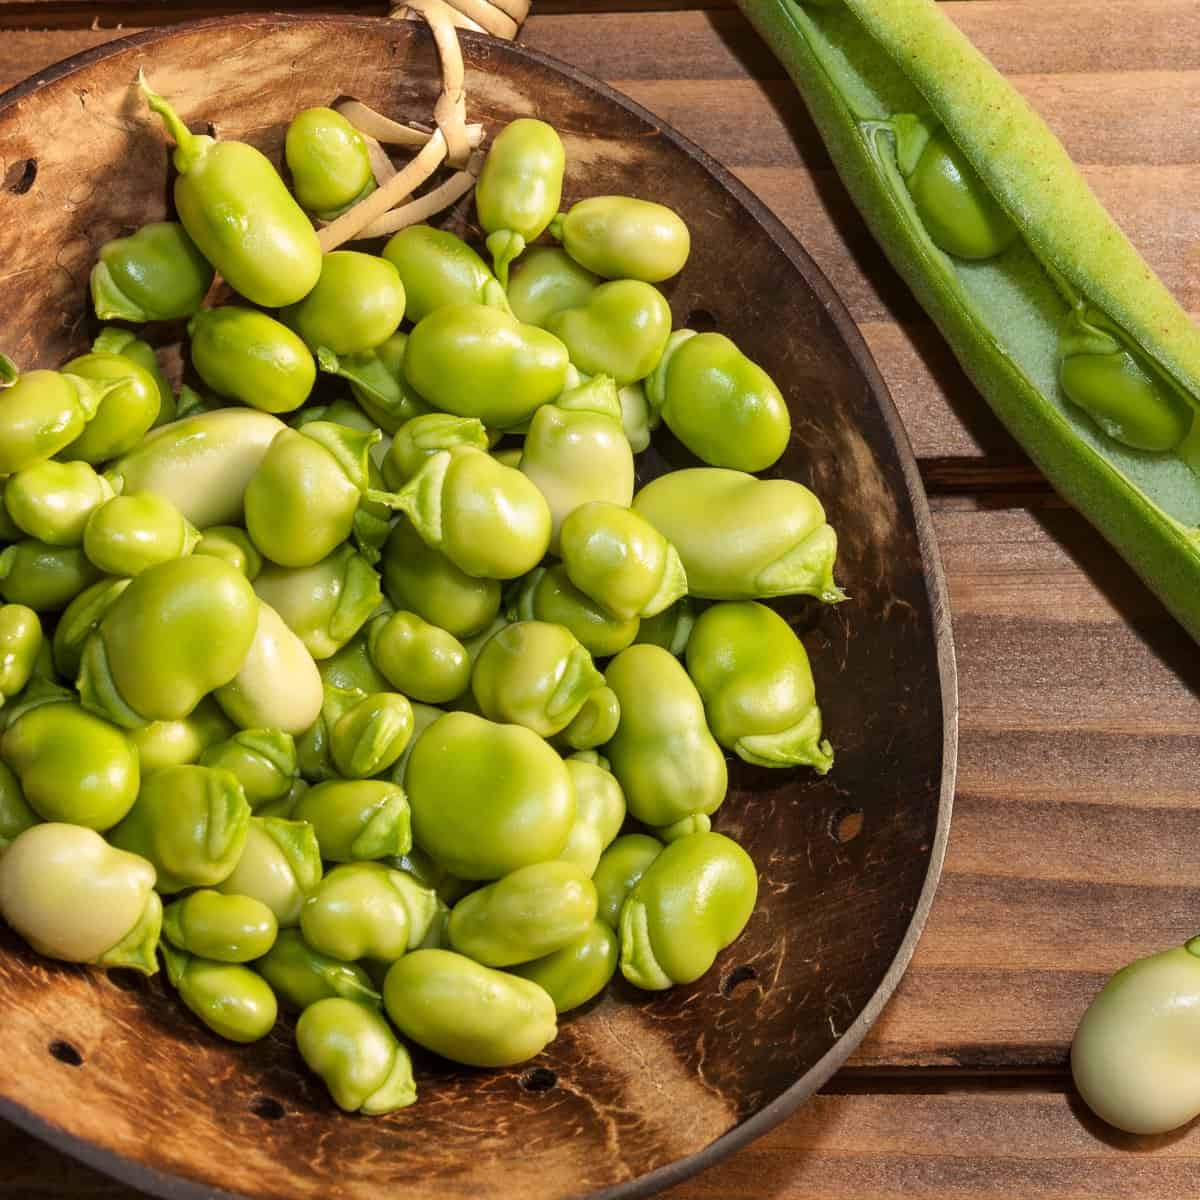 How to cook with broad beans